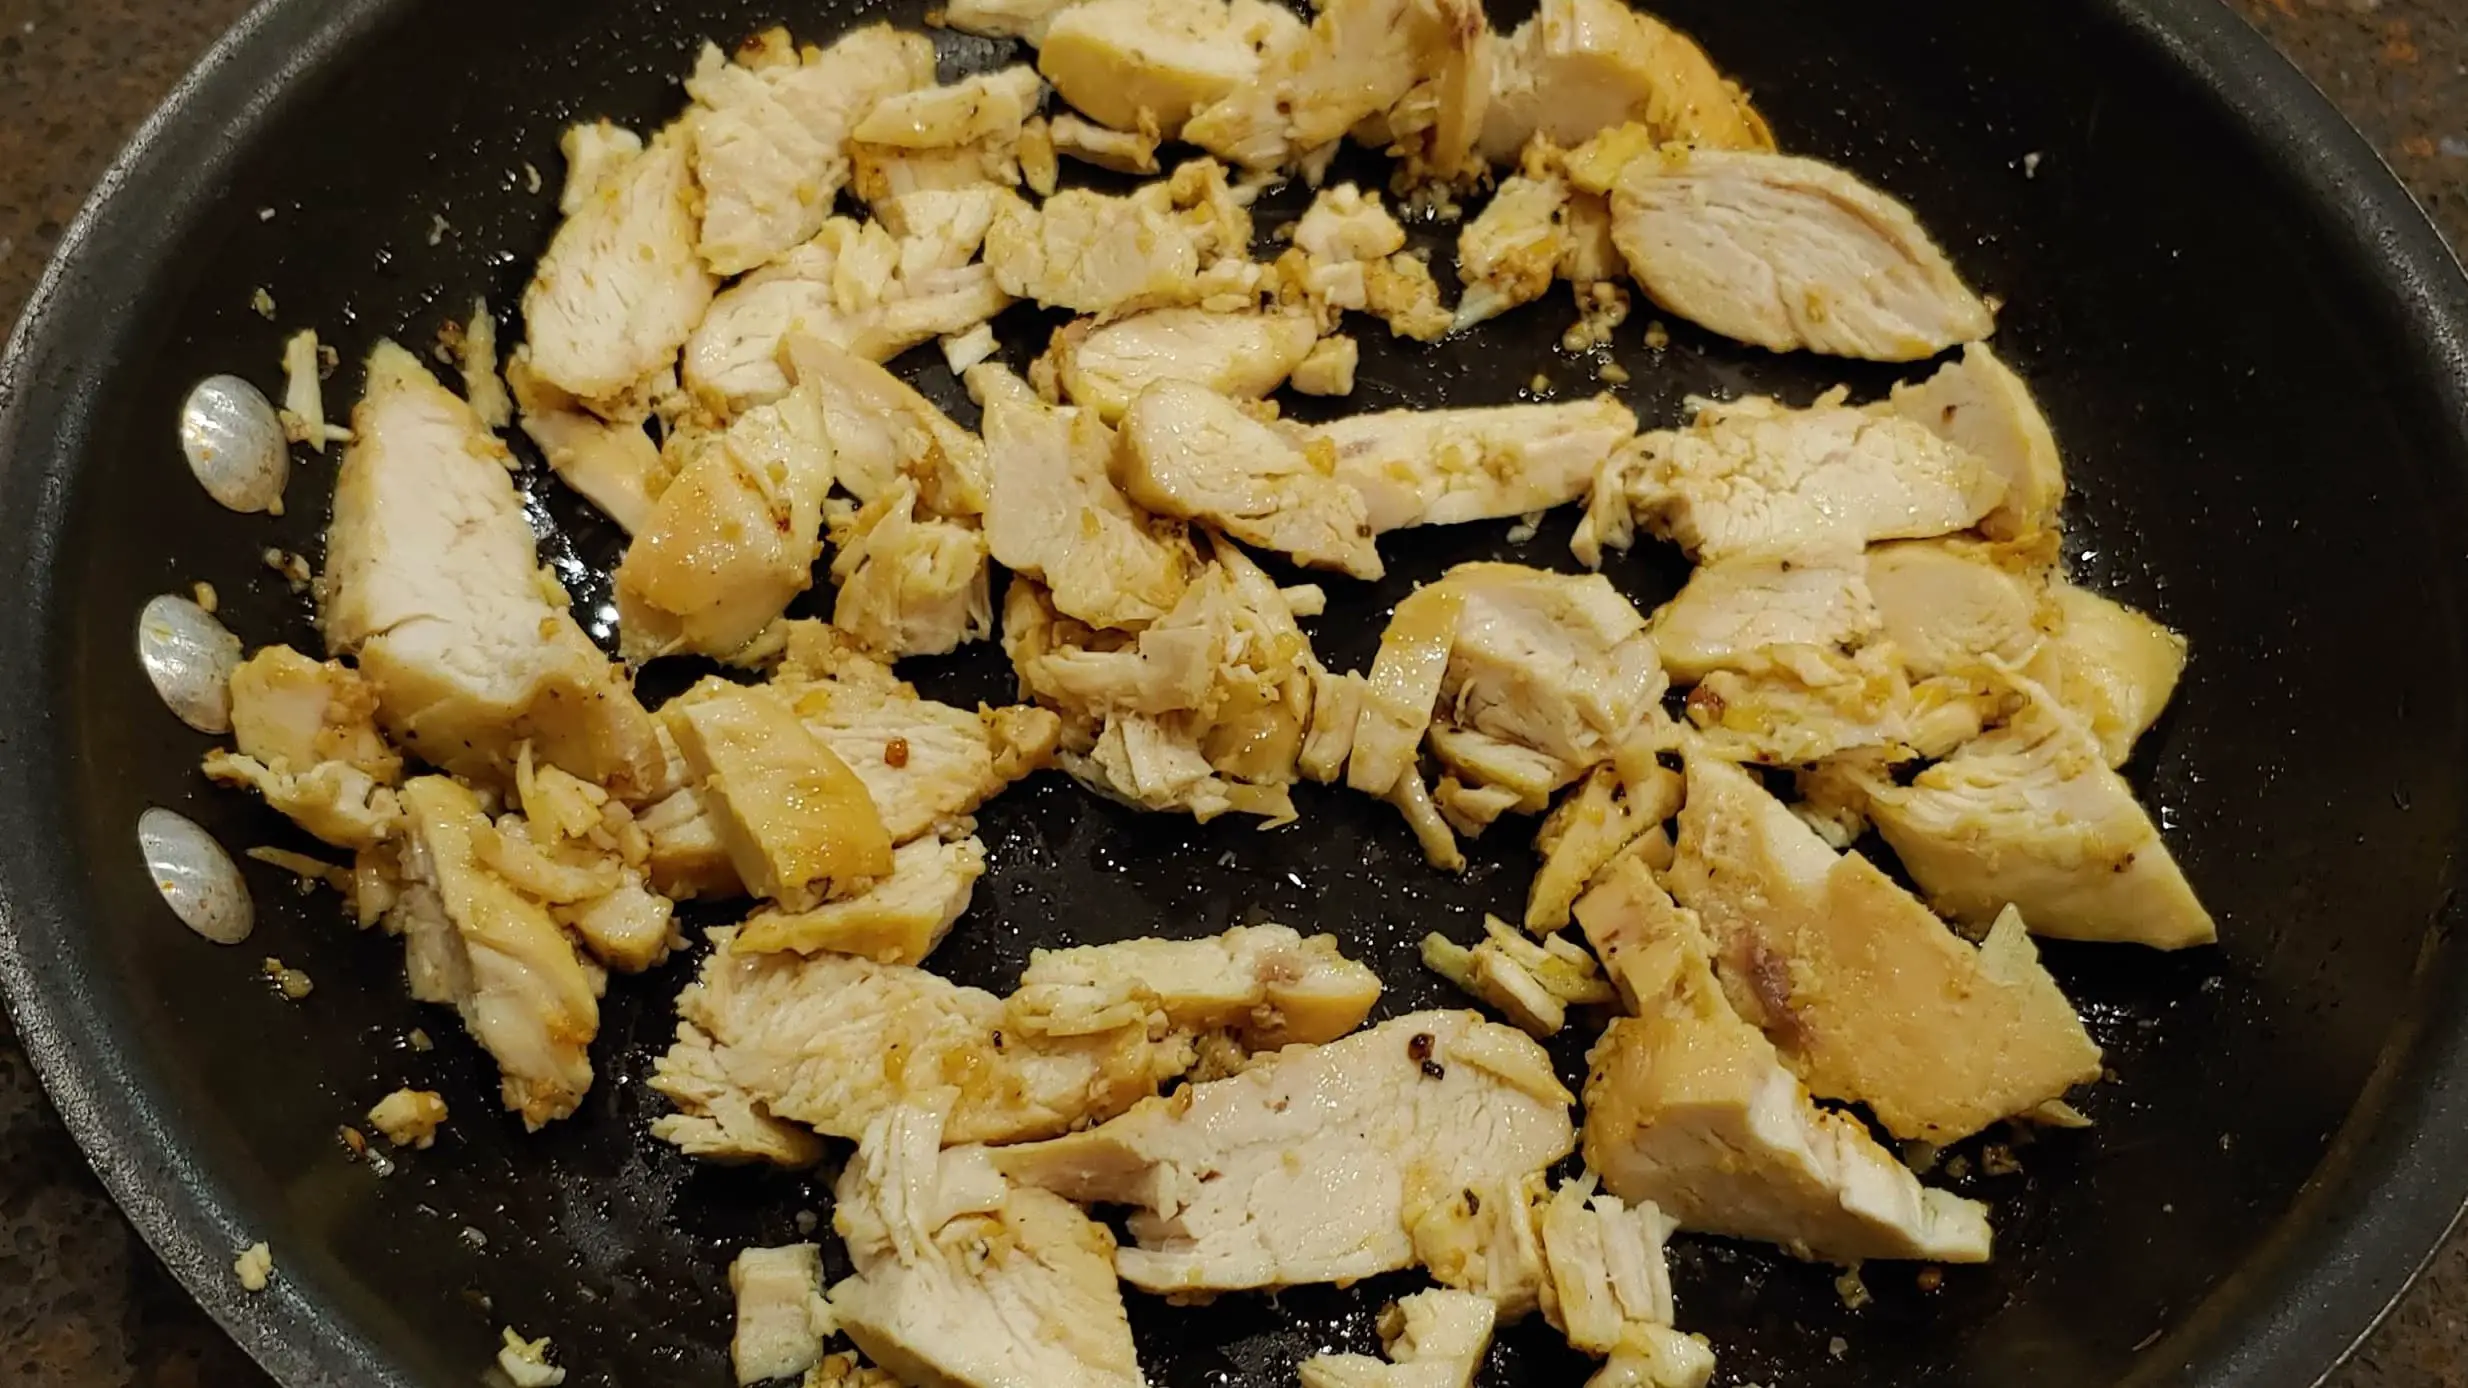 Roasted Marinated Chicken Breasts Slices - Dining in with Danielle